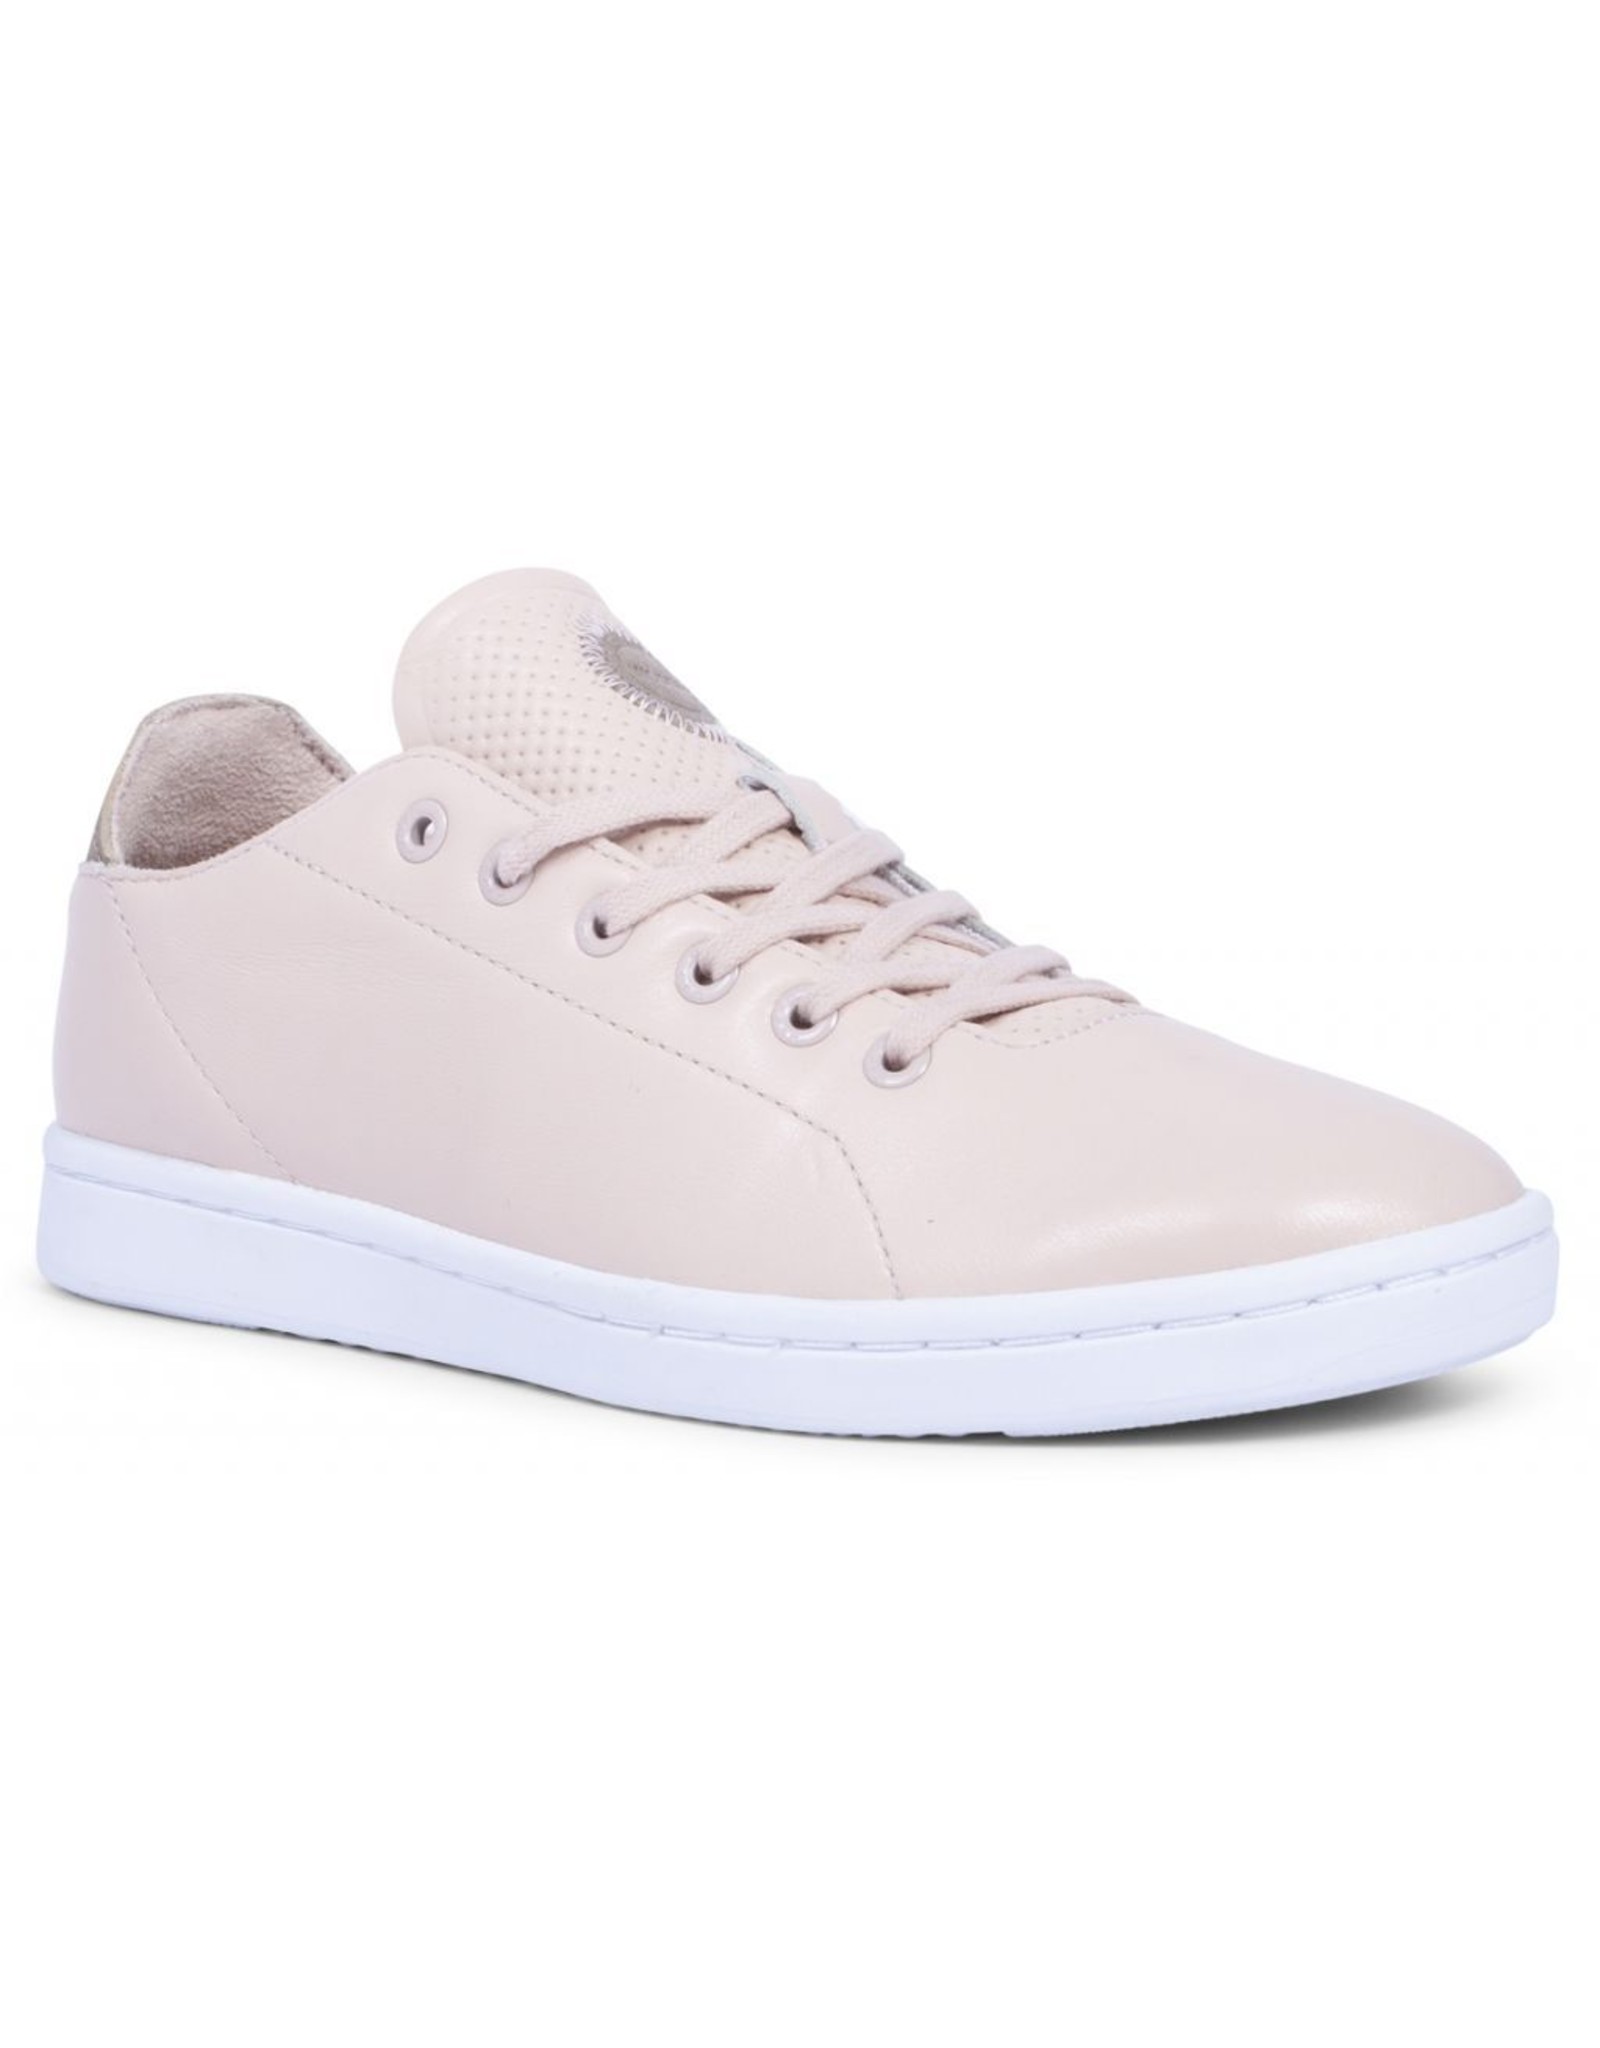 Woden - Jane Leather Trainers - WL861 